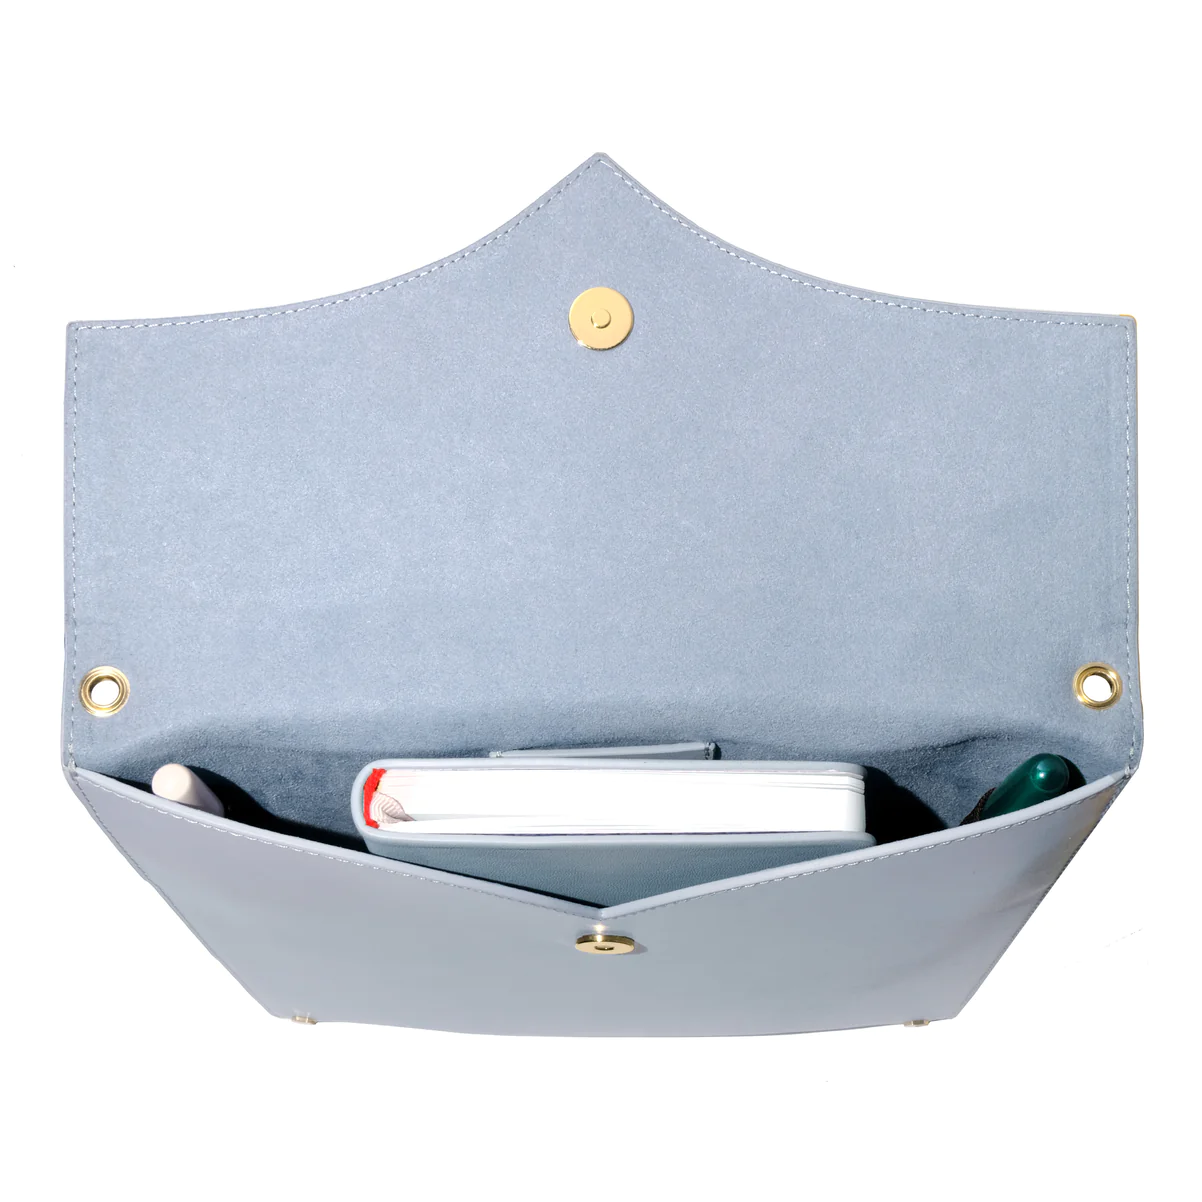 Leather stationary collection - The pendant Folio A5 / Light blue